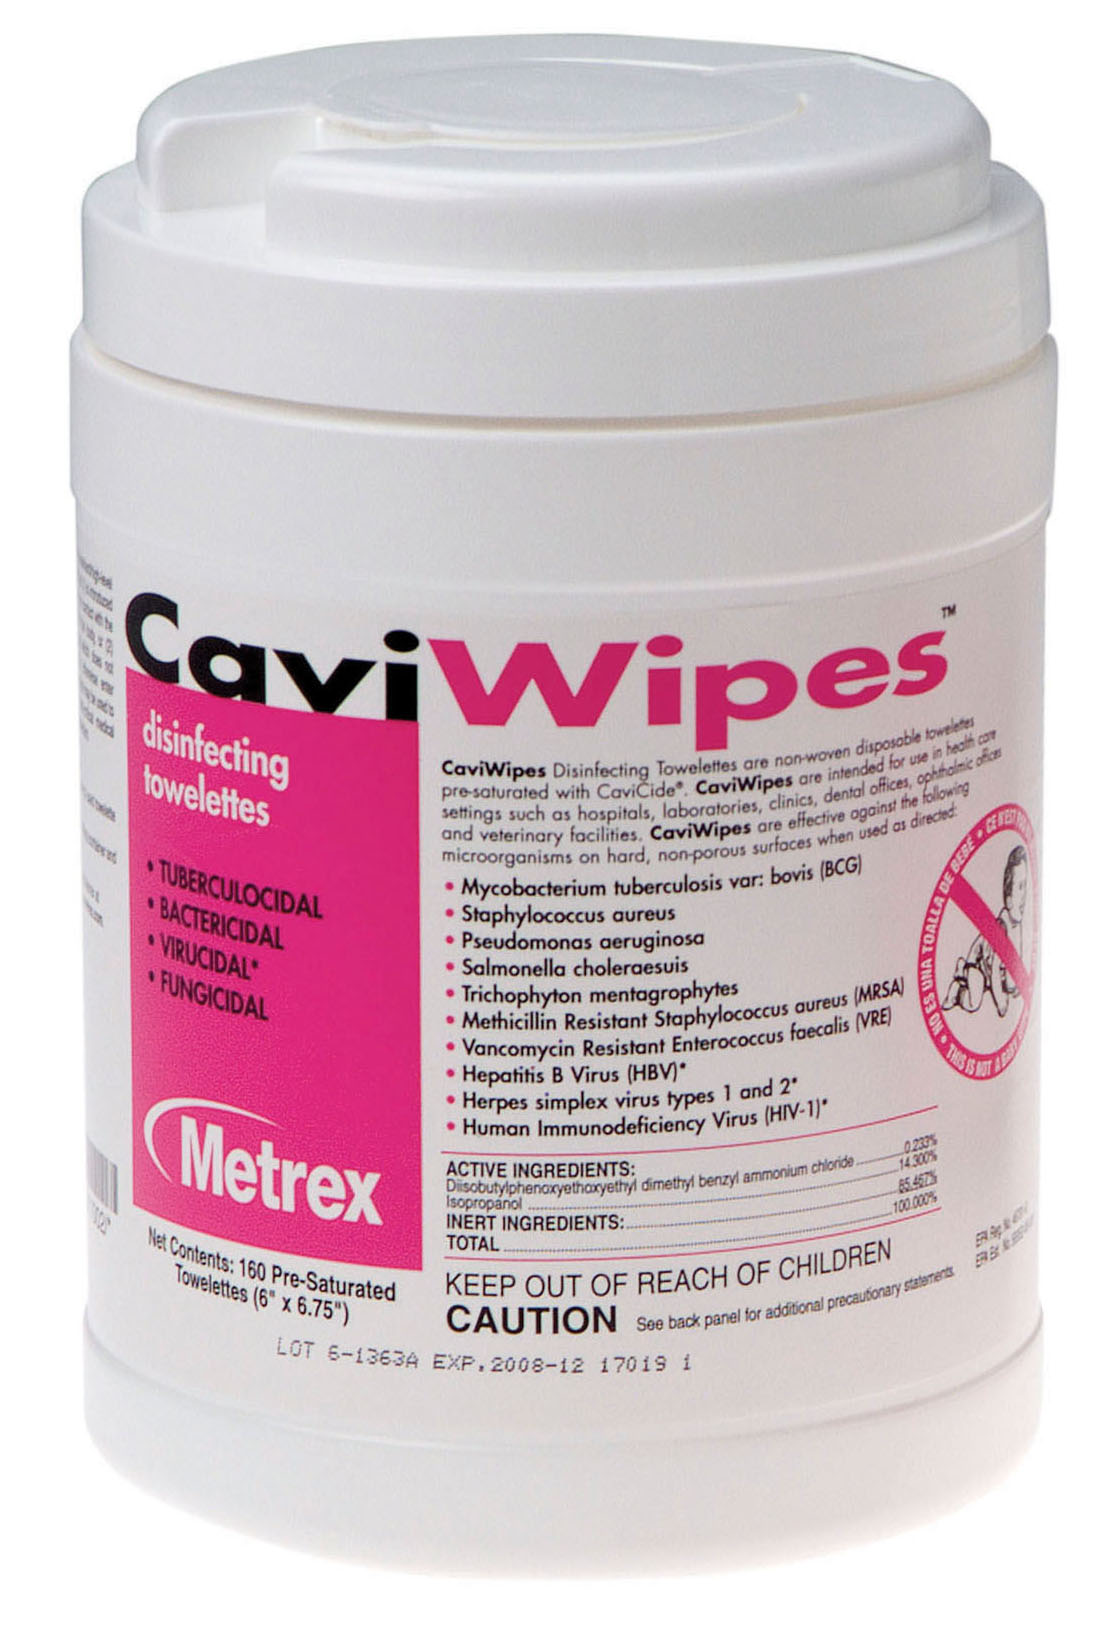 Metrex CaviWipes Surface Disinfectant Towelettes Item 13-1100 case